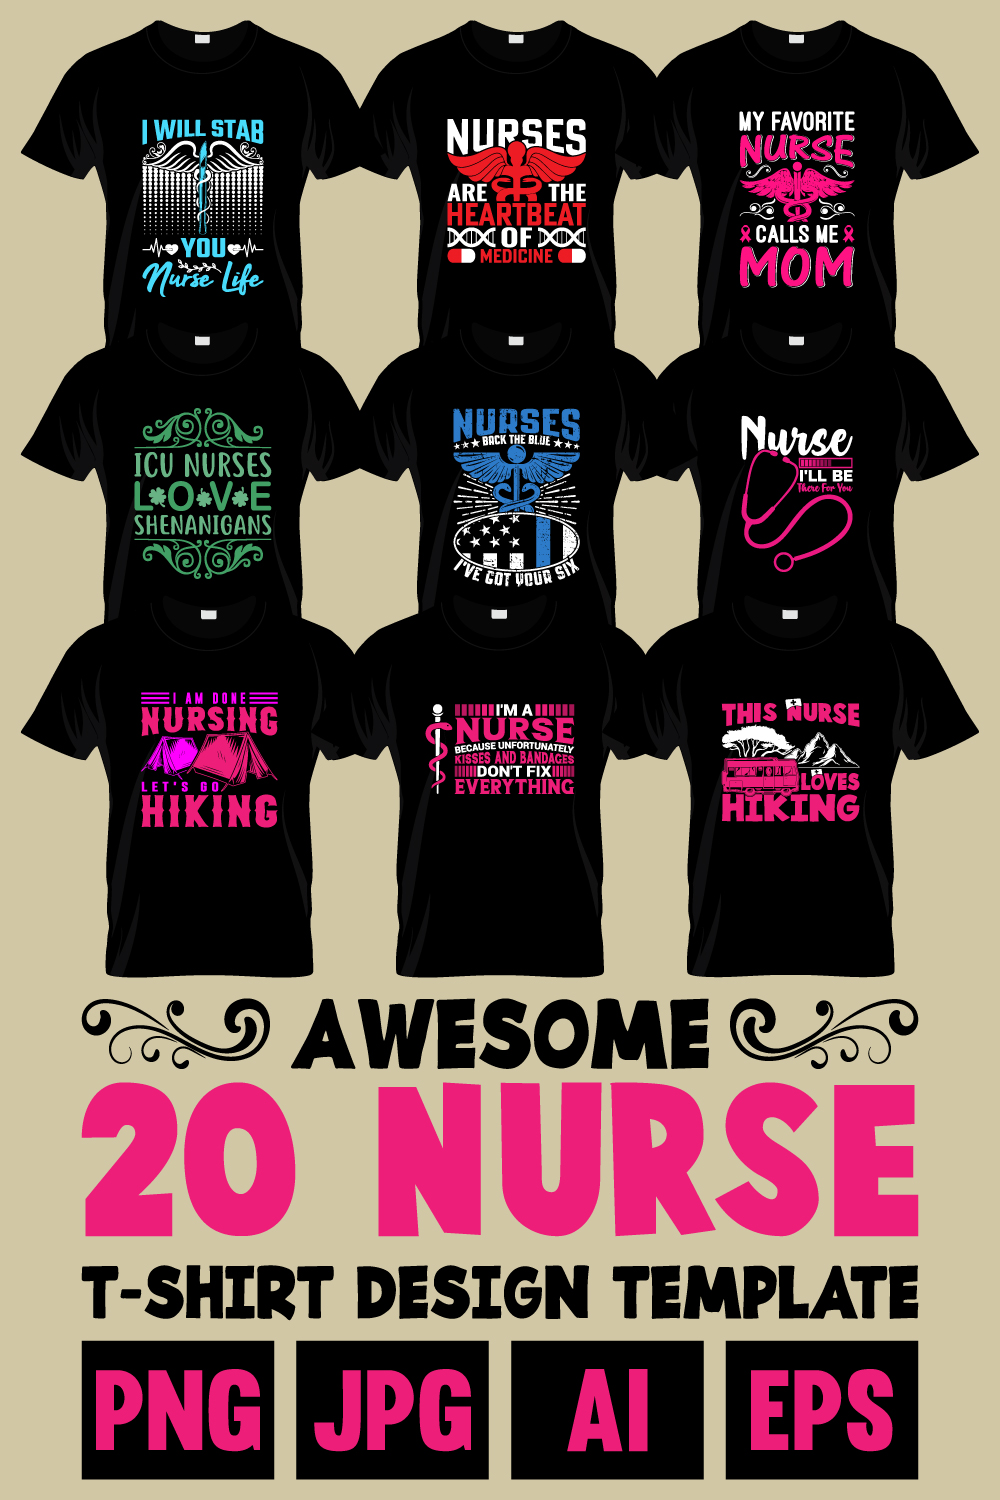 This is high quality nurse t-shirt design template with printable file pinterest preview image.